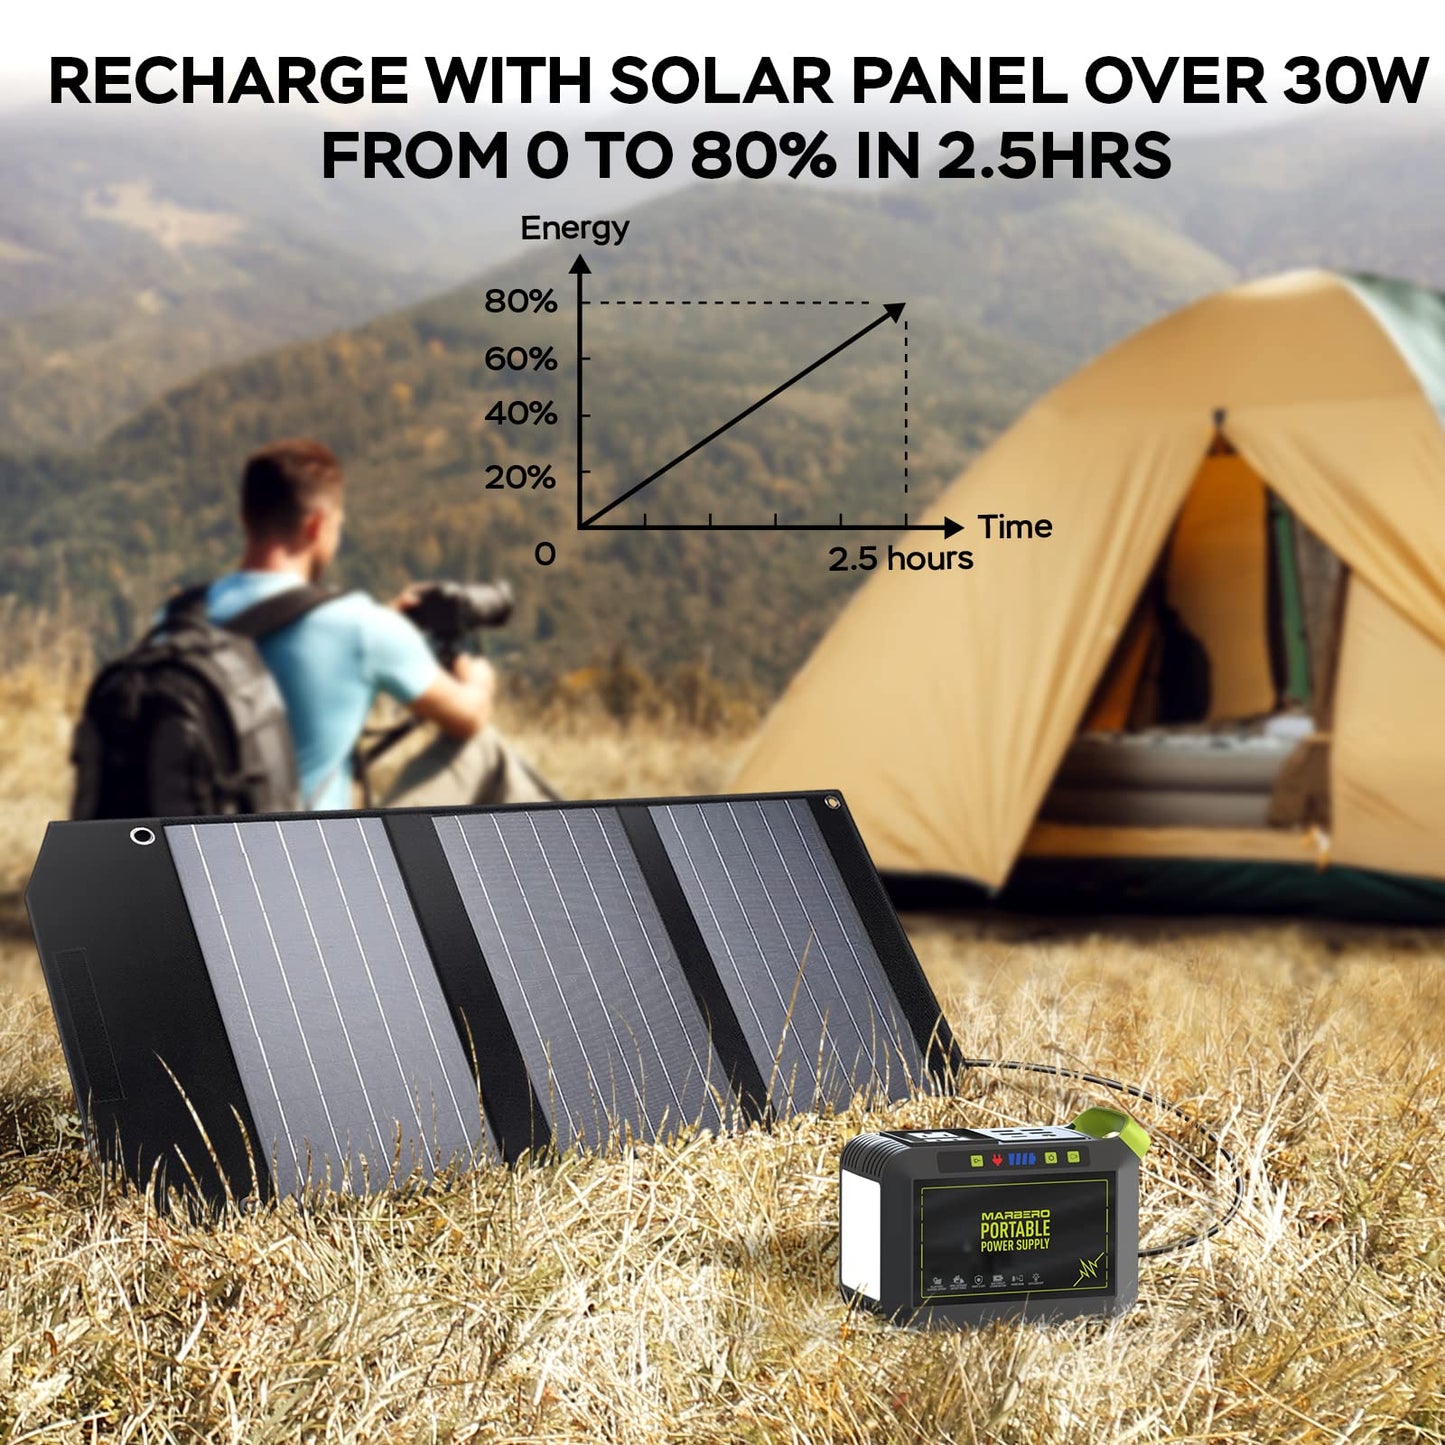 MARBERO Portable Power Station 88Wh Camping Lithium Battery Solar Generator Fast Charging with AC Outlet 120W Peak Power Bank(Solar Panel Optional) for Home Backup Outdoor Emergency RV Van Hunting